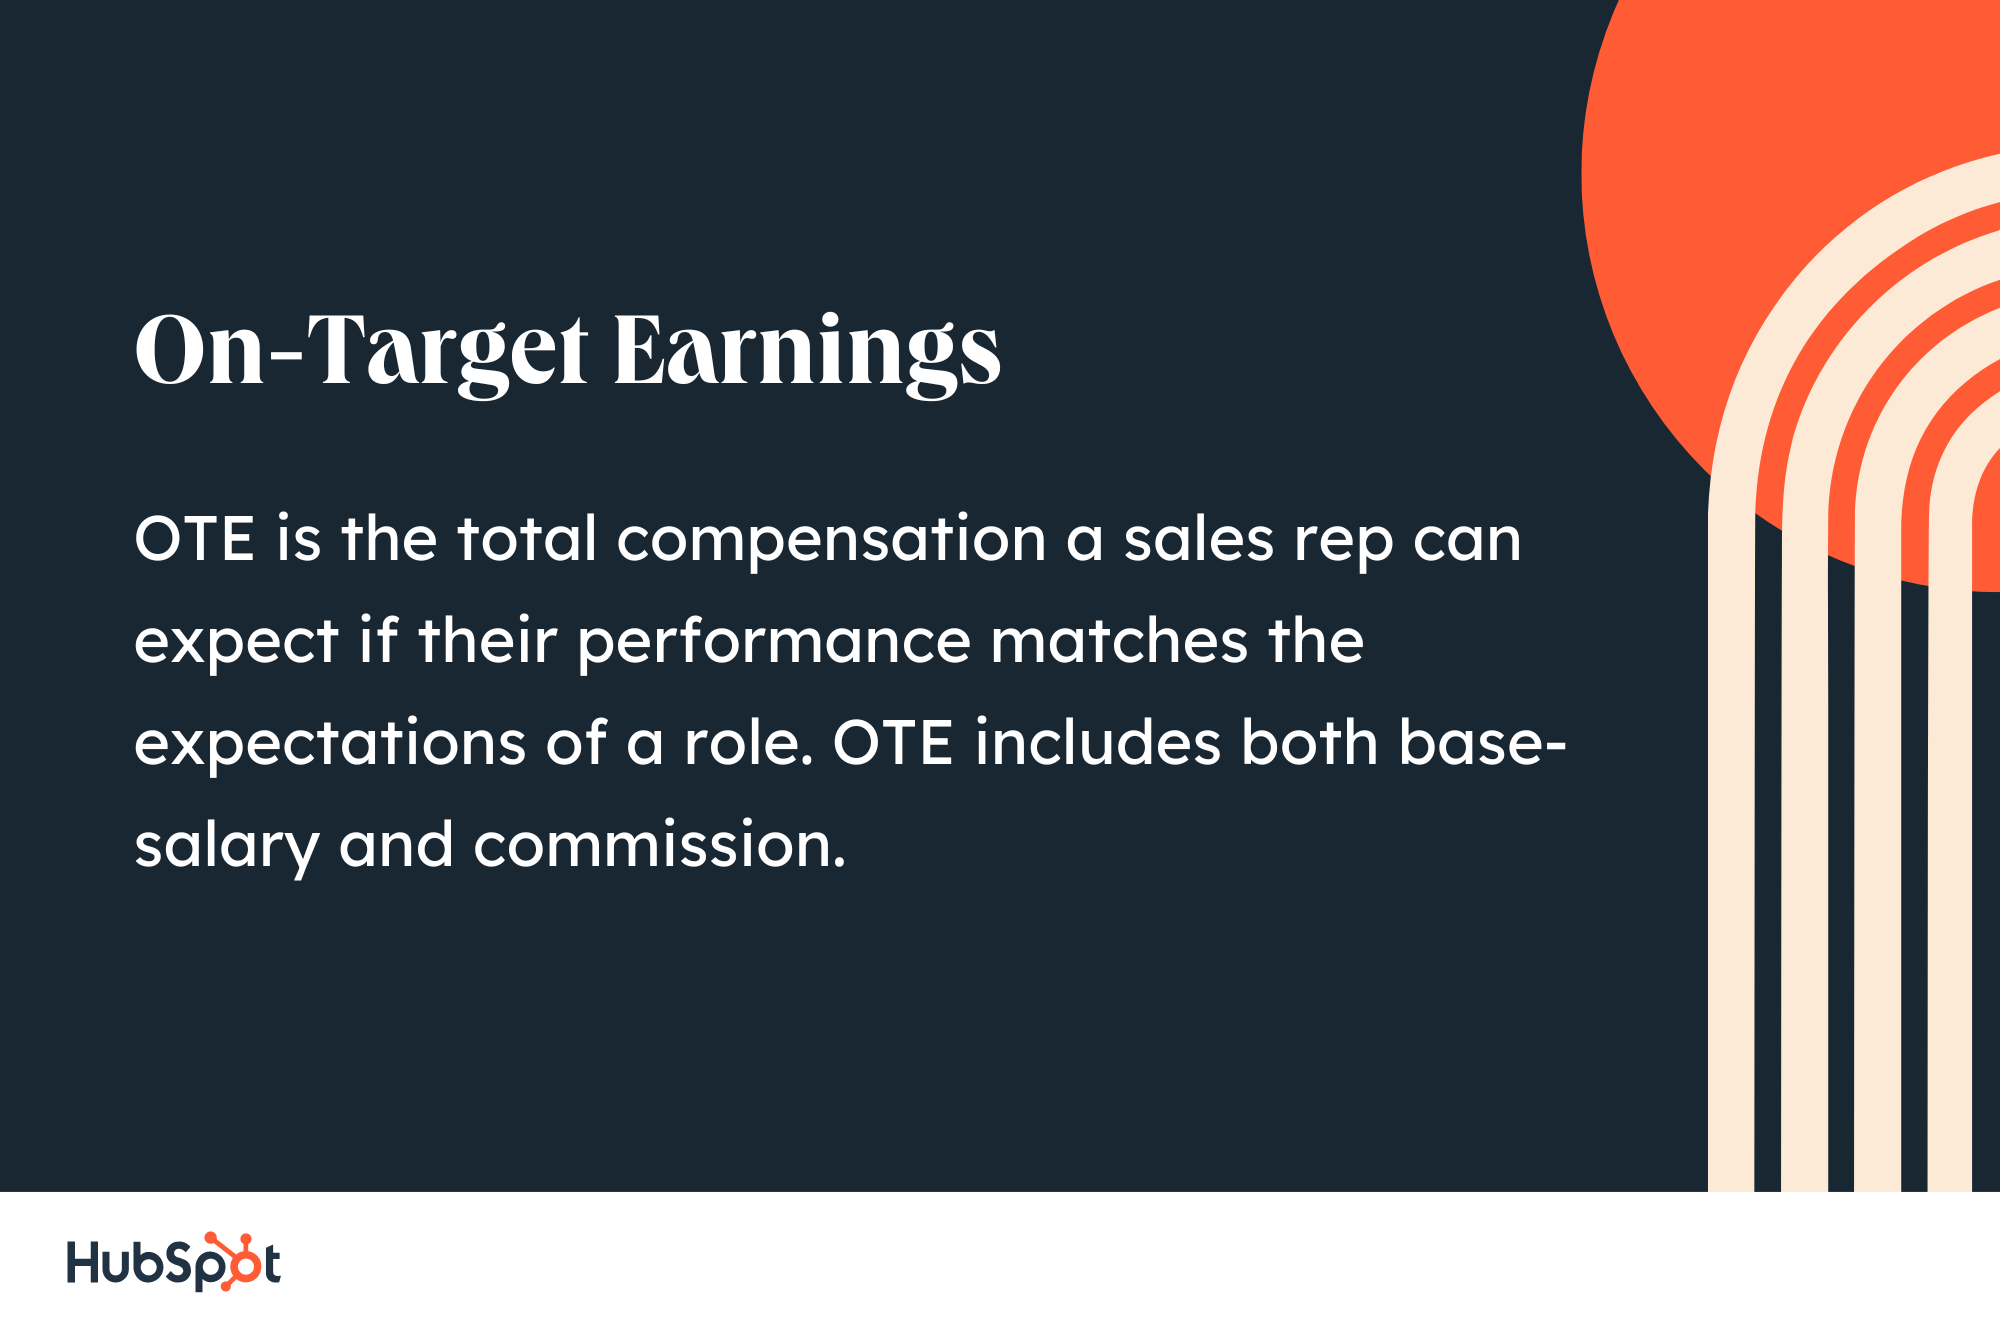 on-target earnings, OTE is the total compensation a sales rep can expect if their performance matches the expectations of a role. OTE includes both base-salary and commission.on-target earnings, OTE is the total compensation a sales rep can expect if their performance matches the expectations of a role. OTE includes both base-salary and commission. 